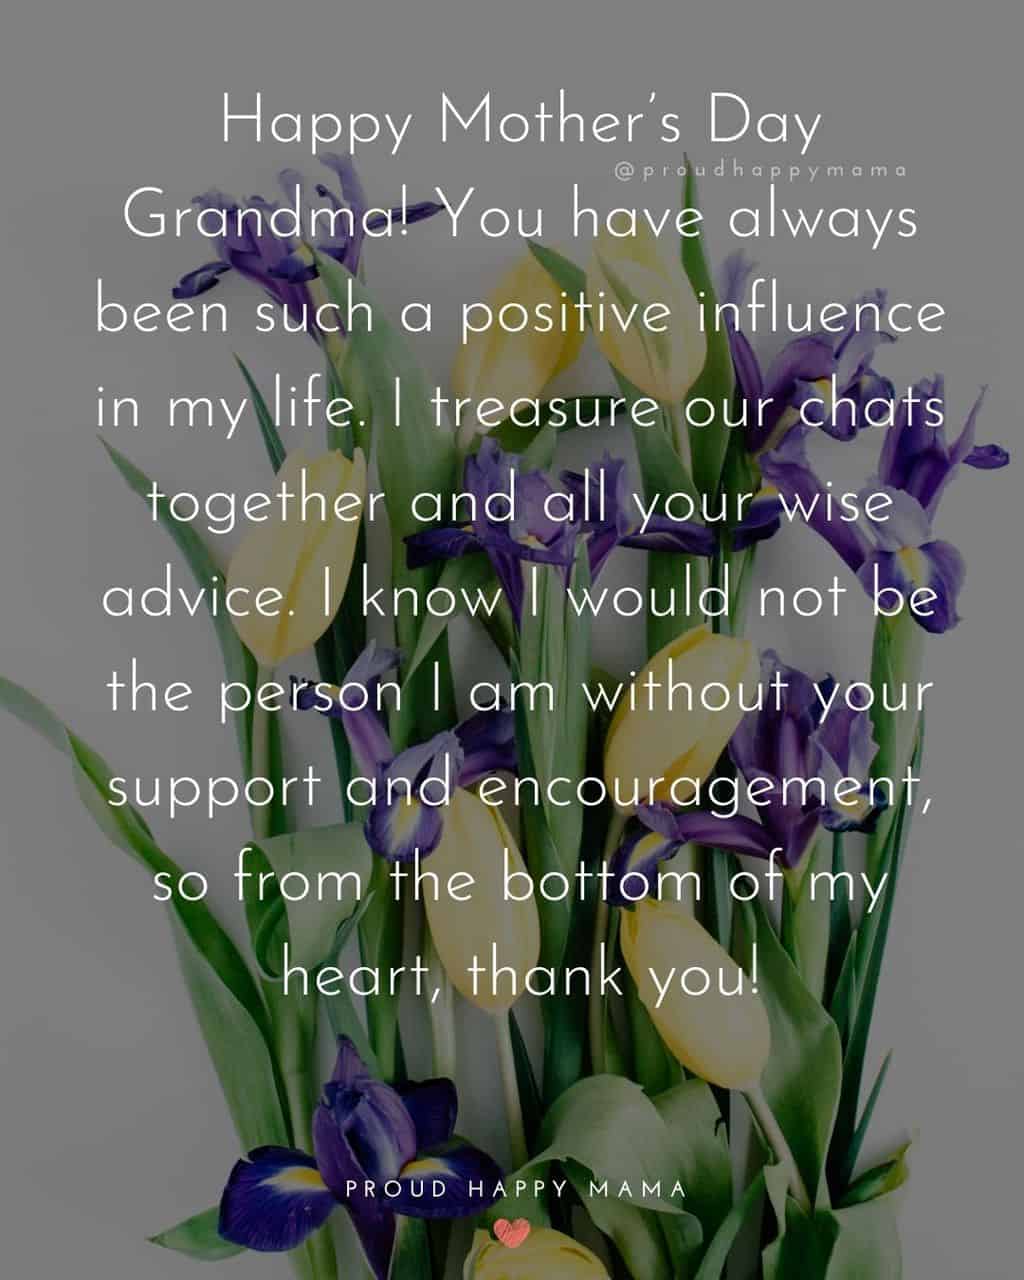 Happy Mothers Day Quotes To Grandma - You have always been such a positive influence in my life. I treasure our chats together